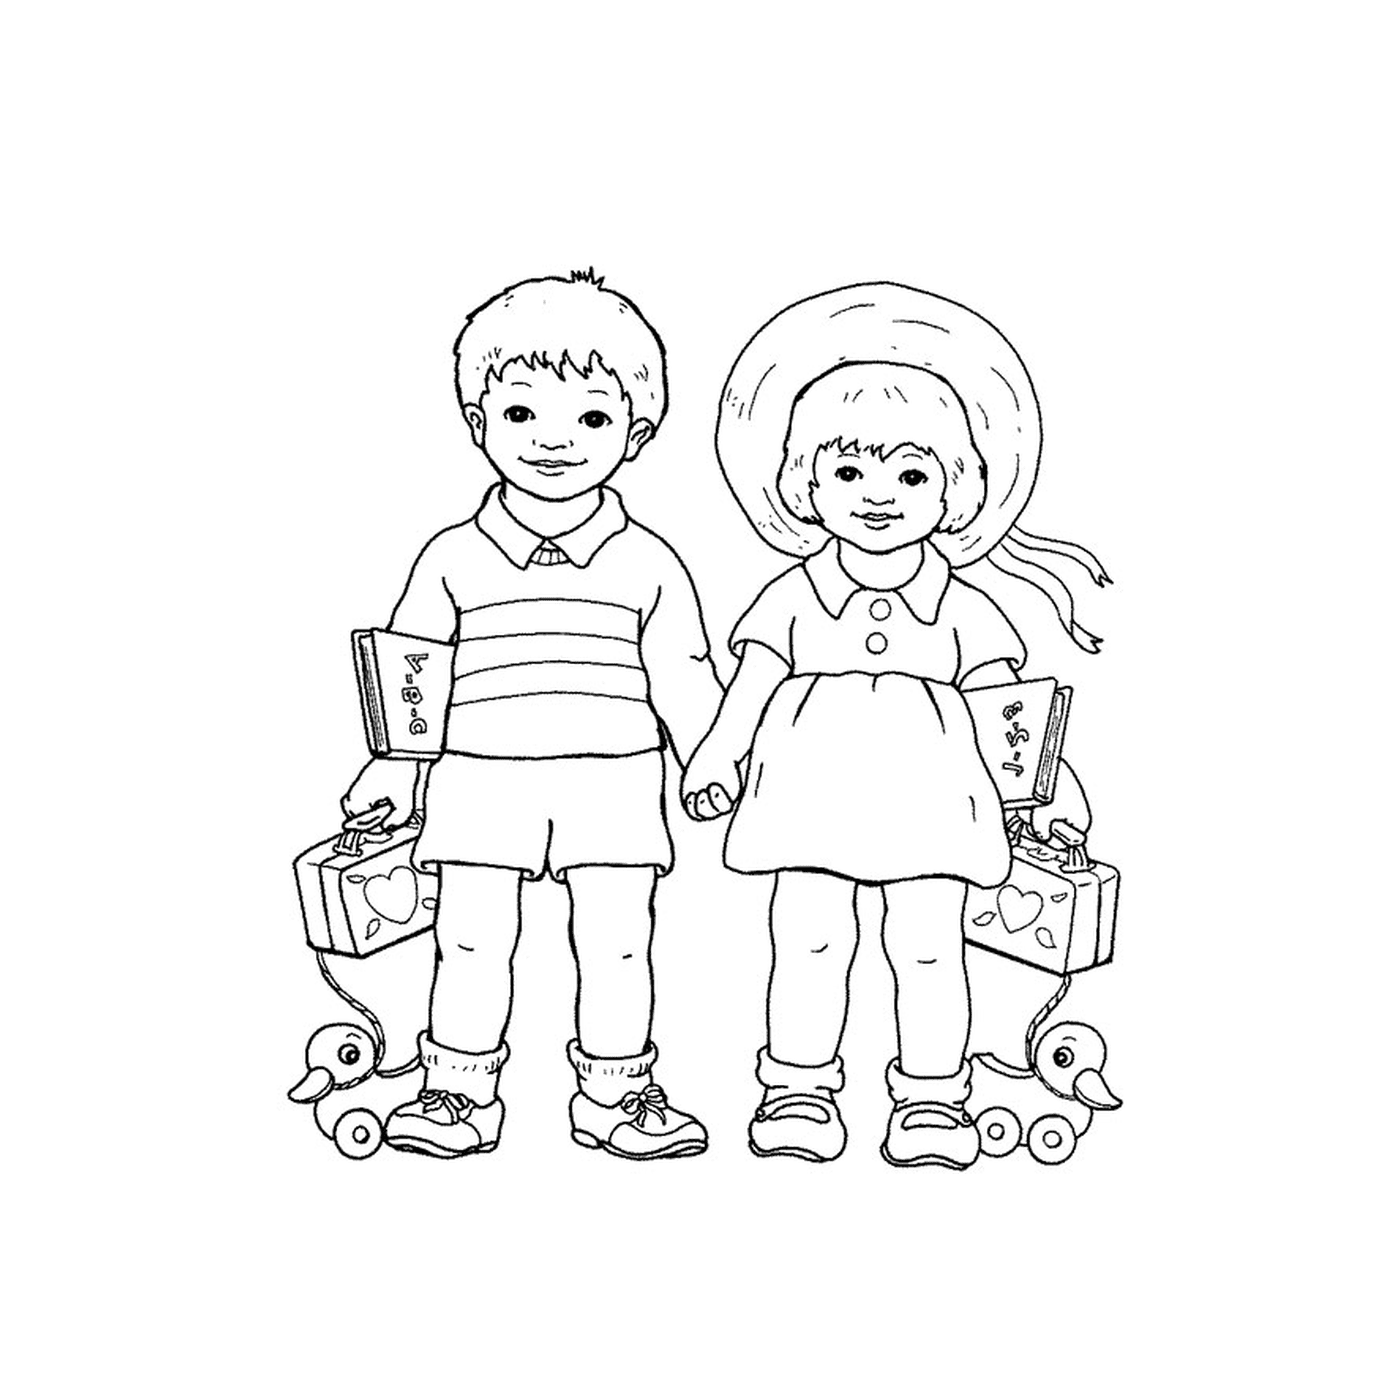  A boy and a girl holding hands 